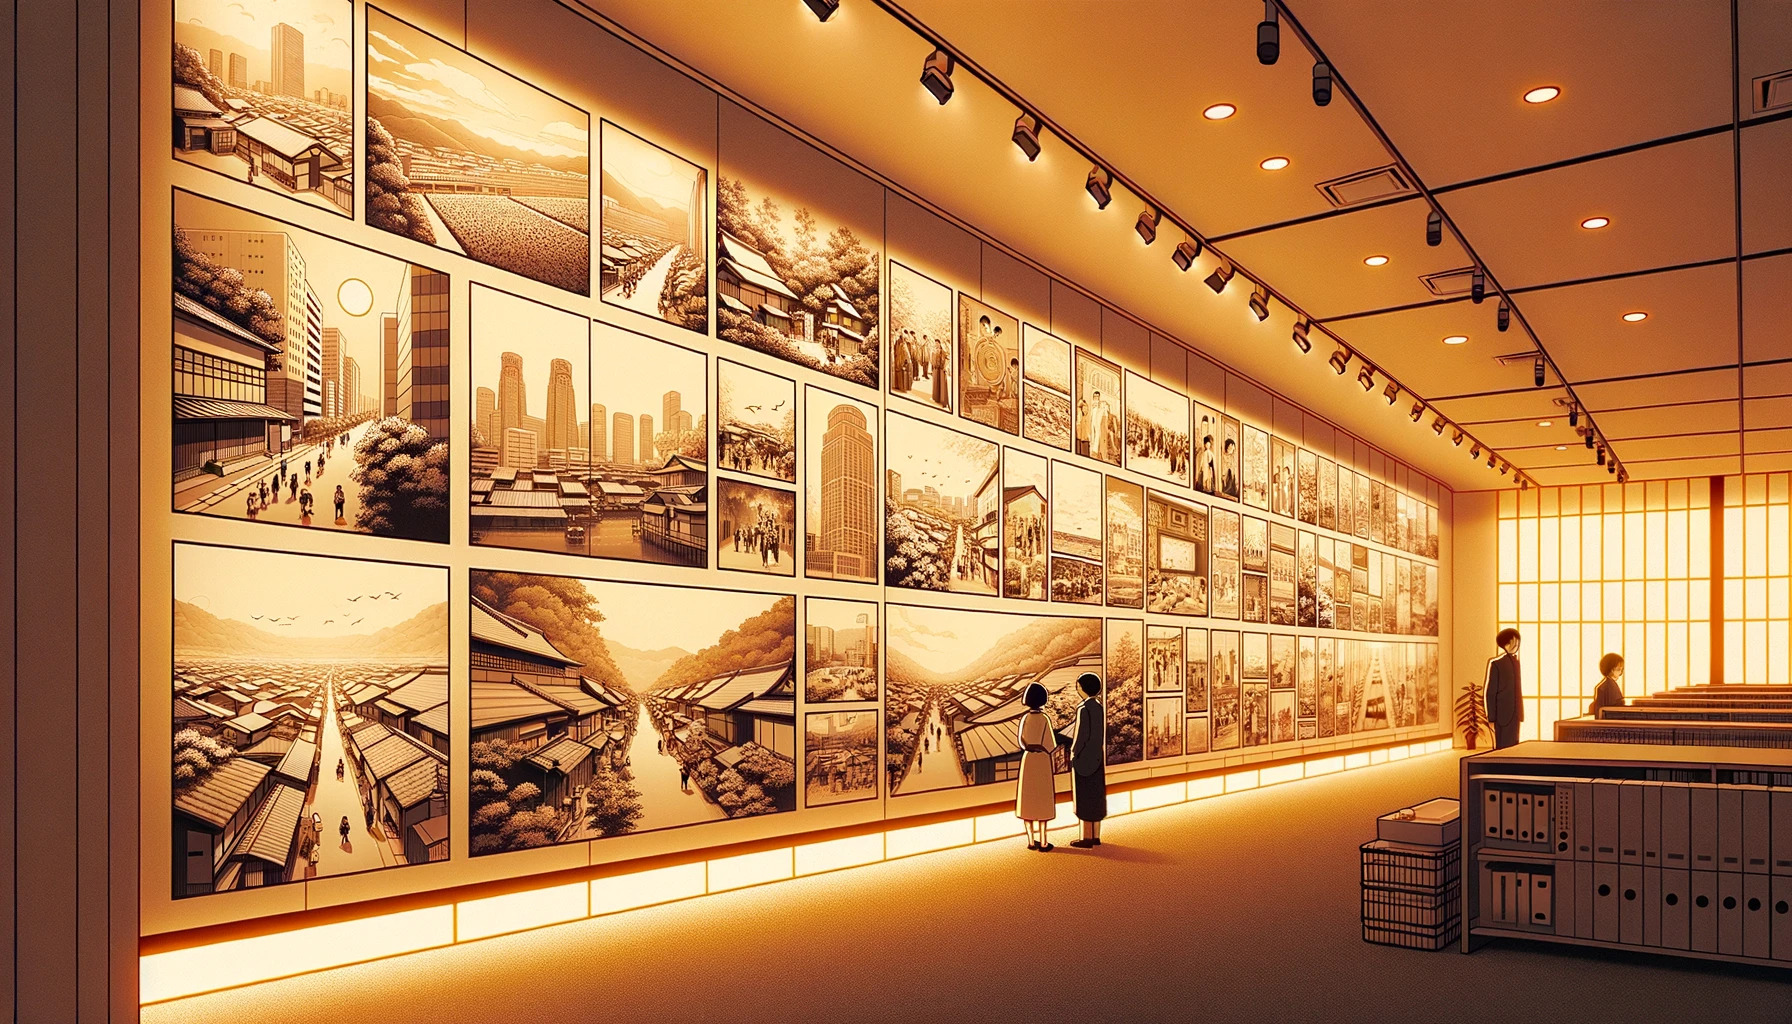 Warm and flat 16:9 illustration showing an expansive wall in an IT company's office space, adorned with monochrome pictures that narrate the history of a suburban Tokyo town.